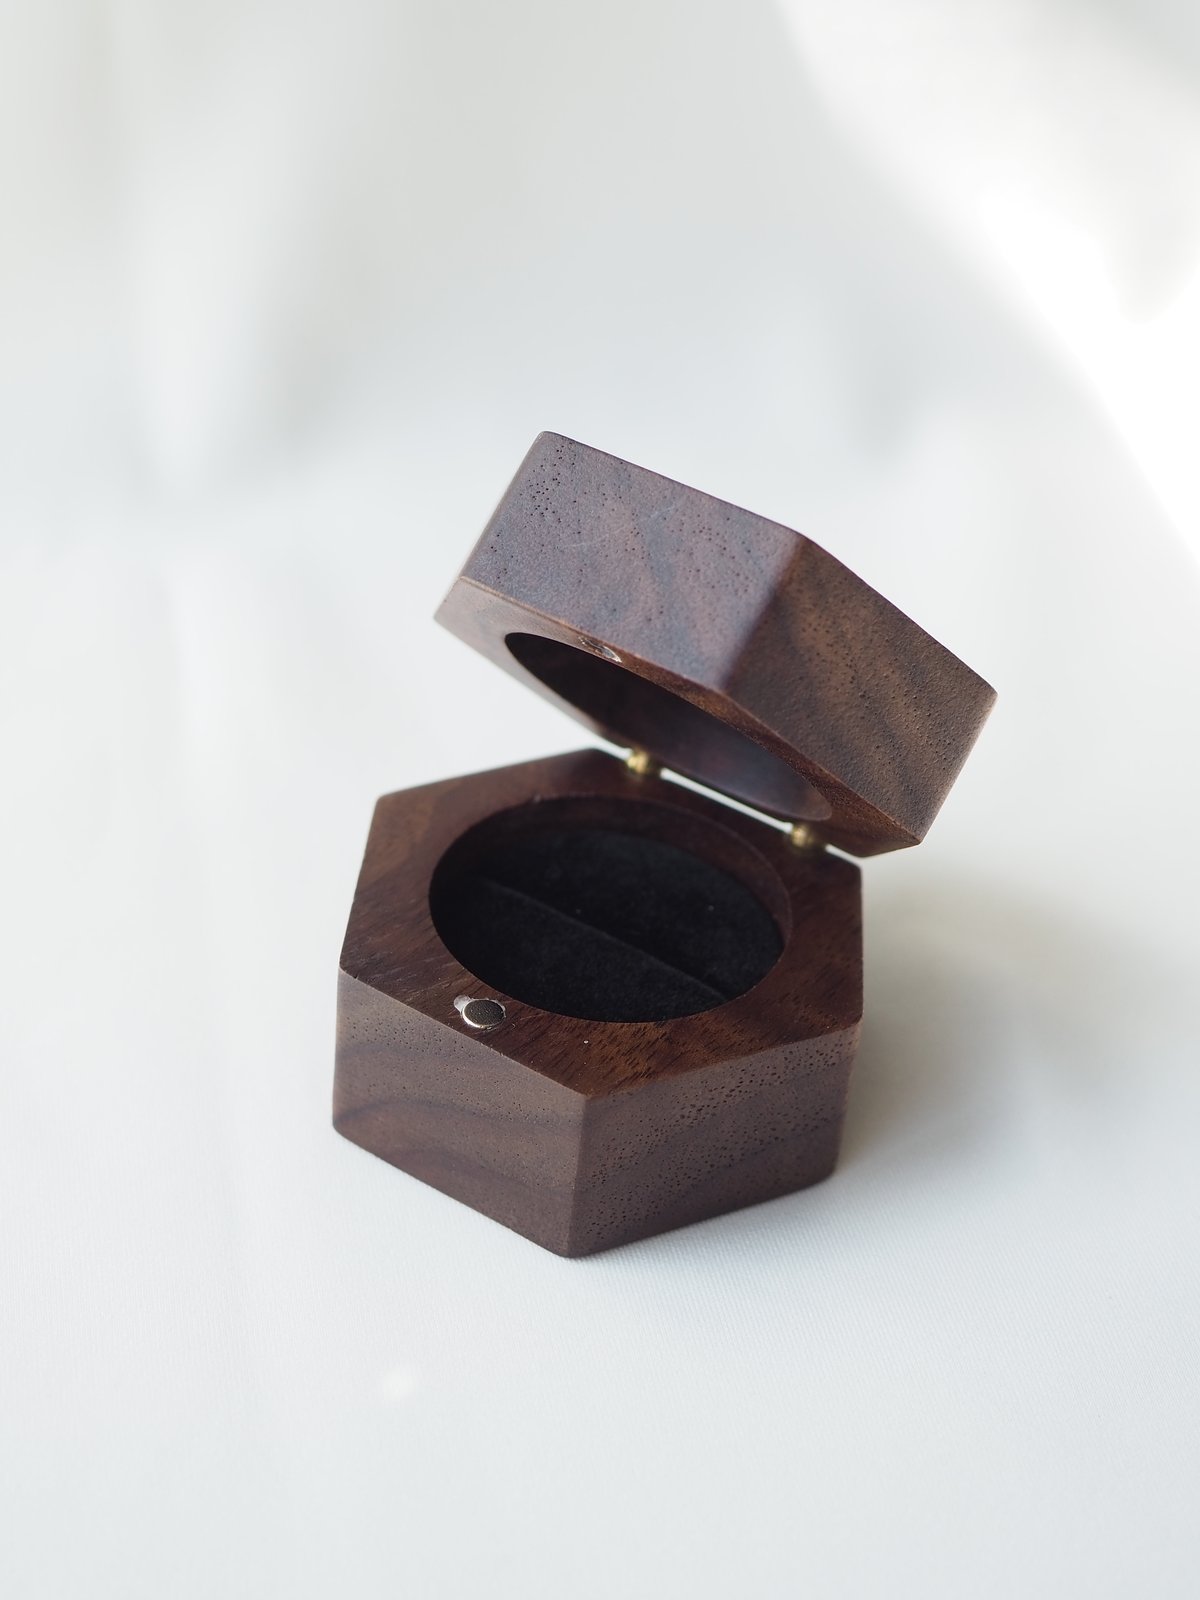 Luxury Wooden Ring Box - S6002 | F.Hinds Jewellers